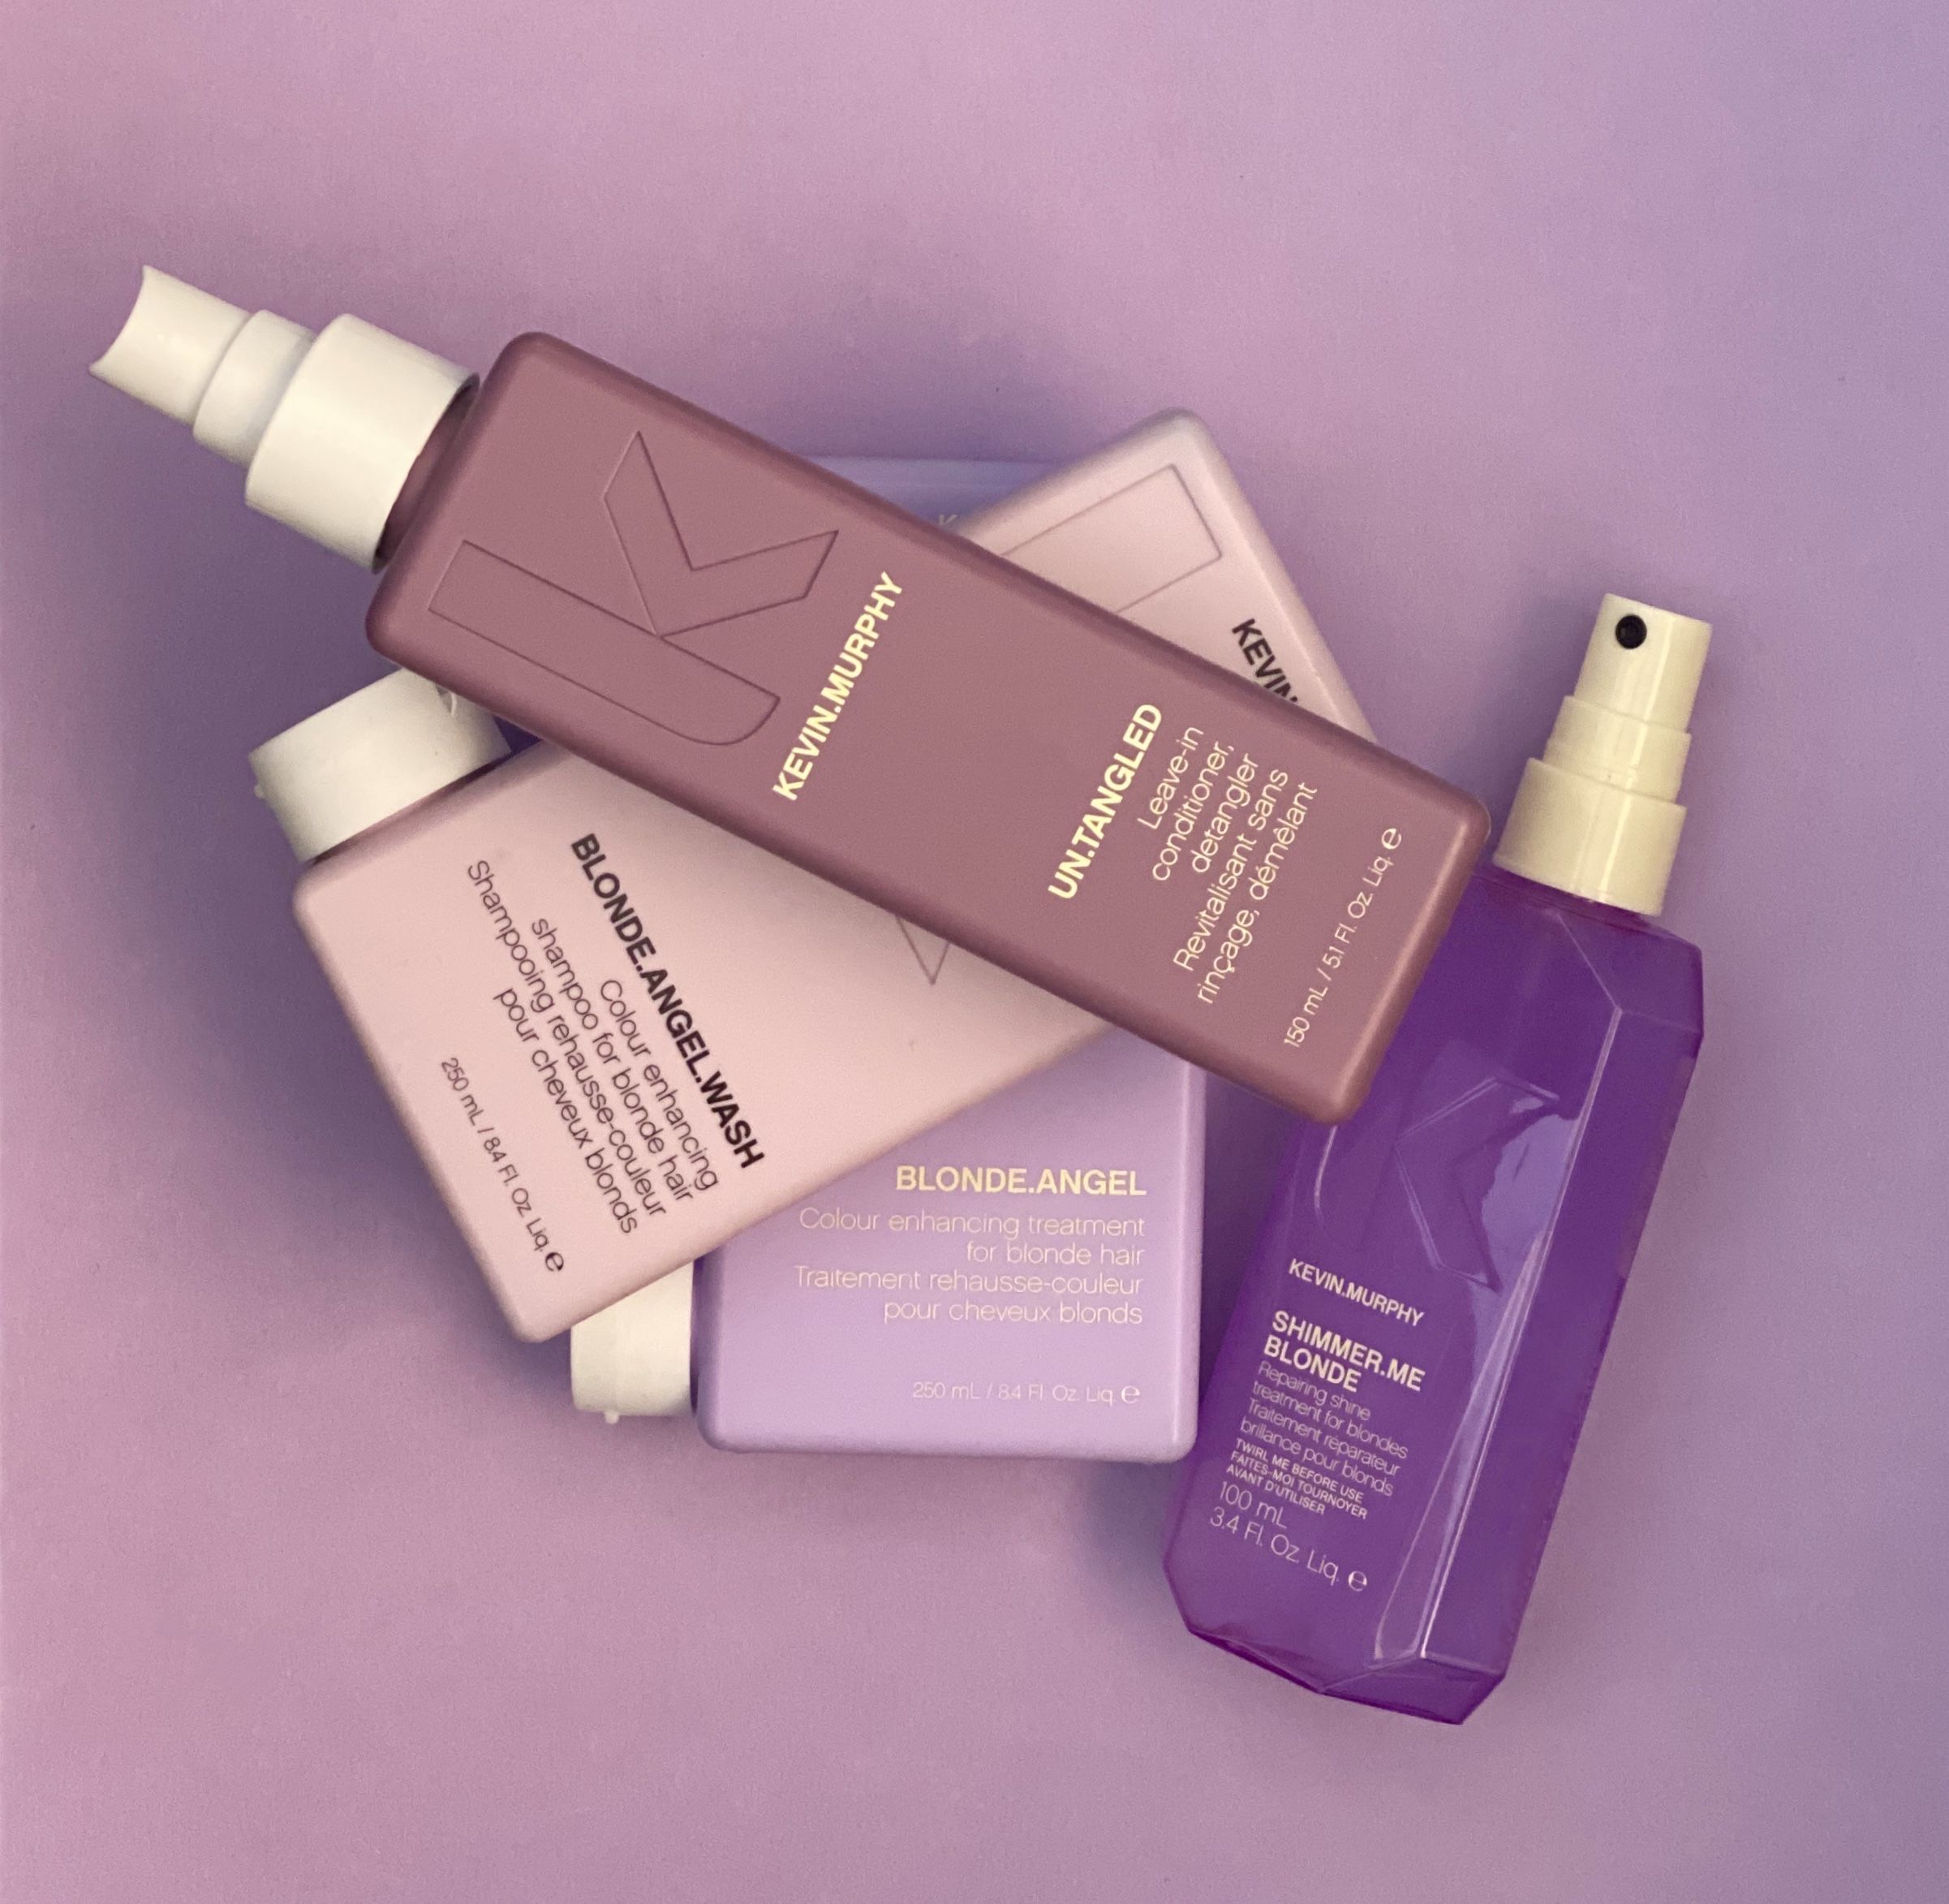 Kevin Murphy Cruelty-Free and Vegan